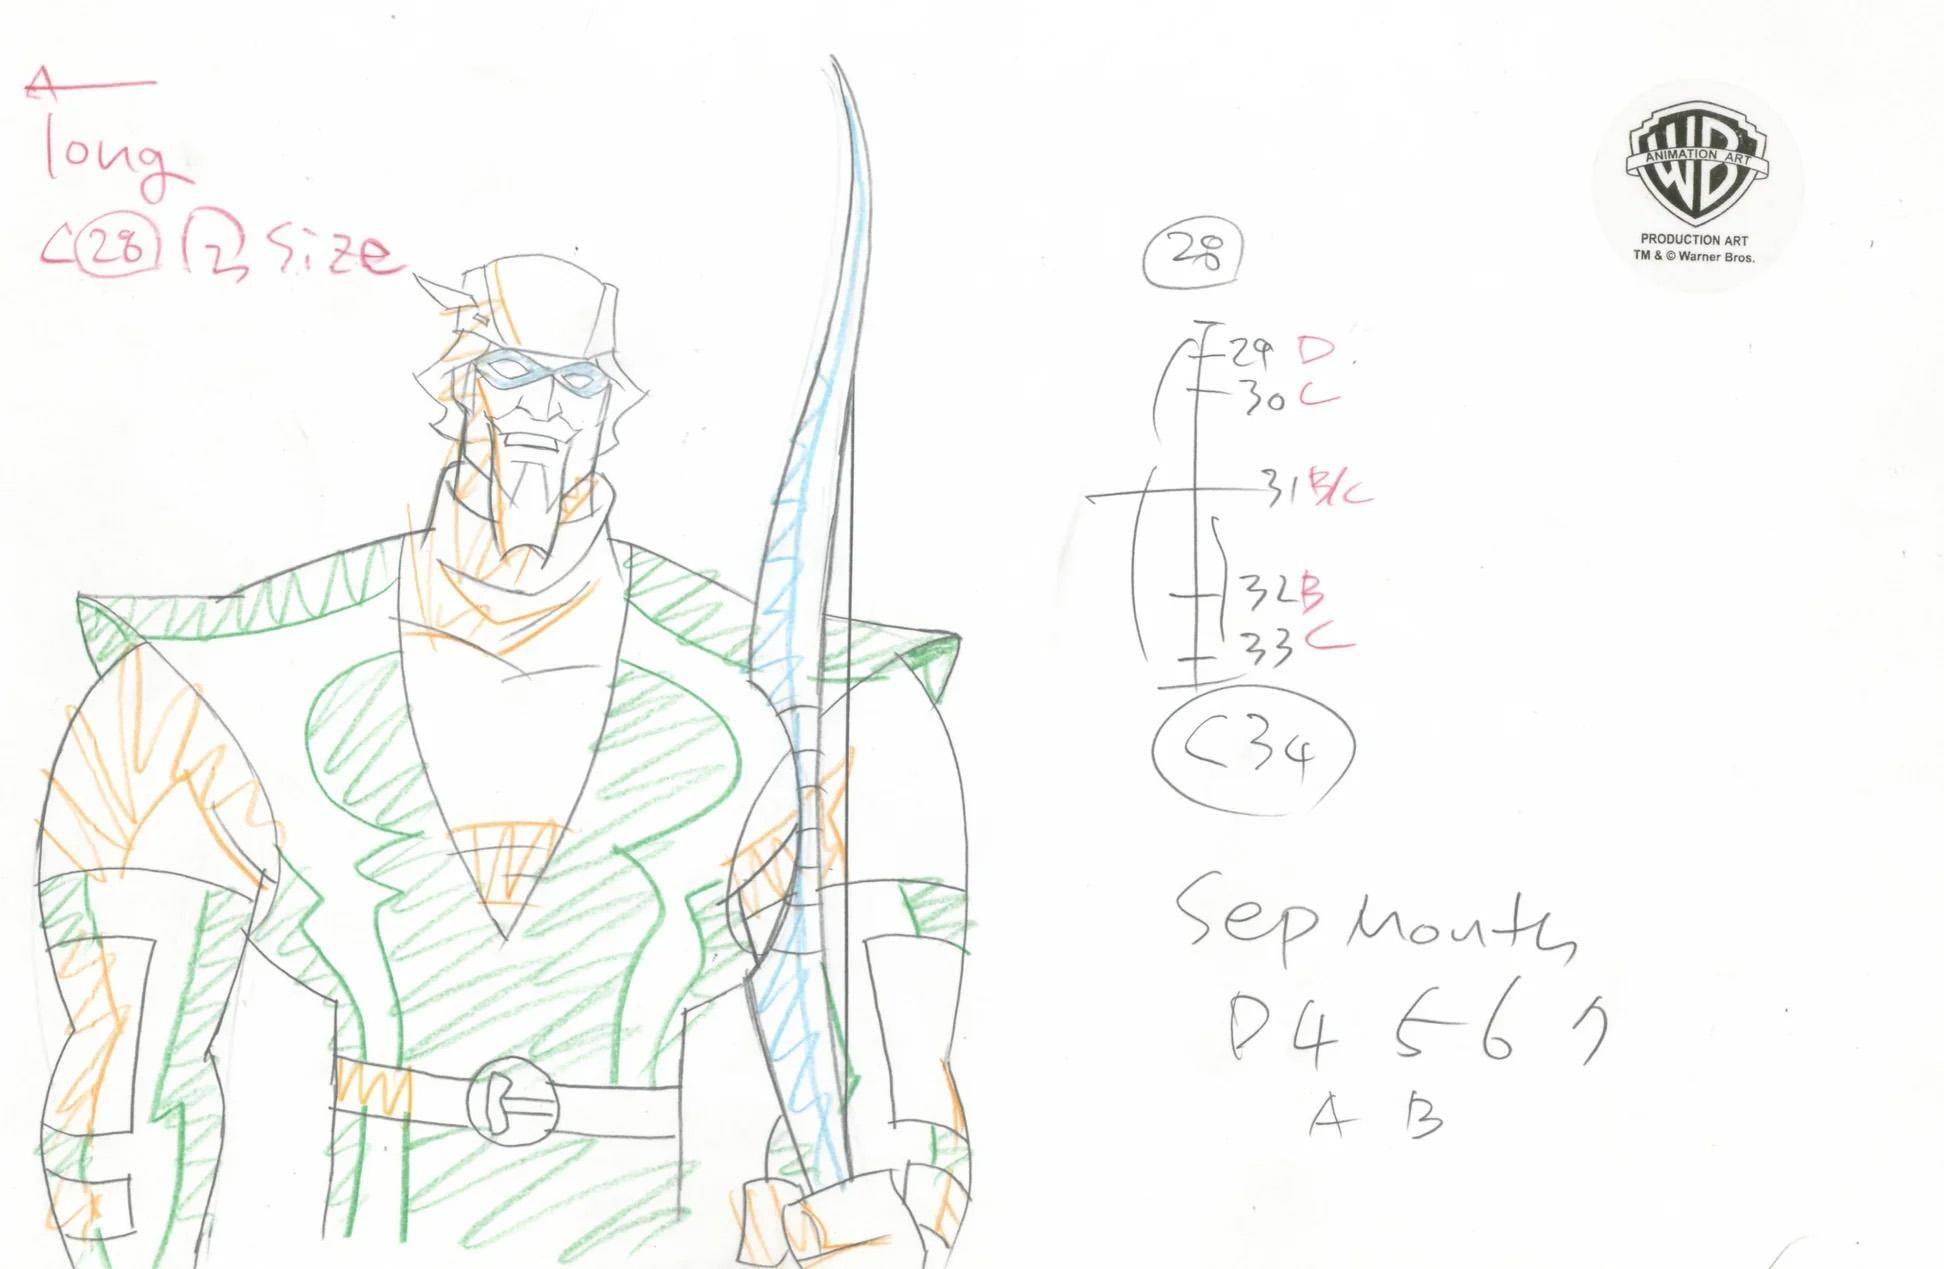 Justice League Unlimited Original Production Drawing: Green Arrow - Art by Warner Bros. Studio Artists